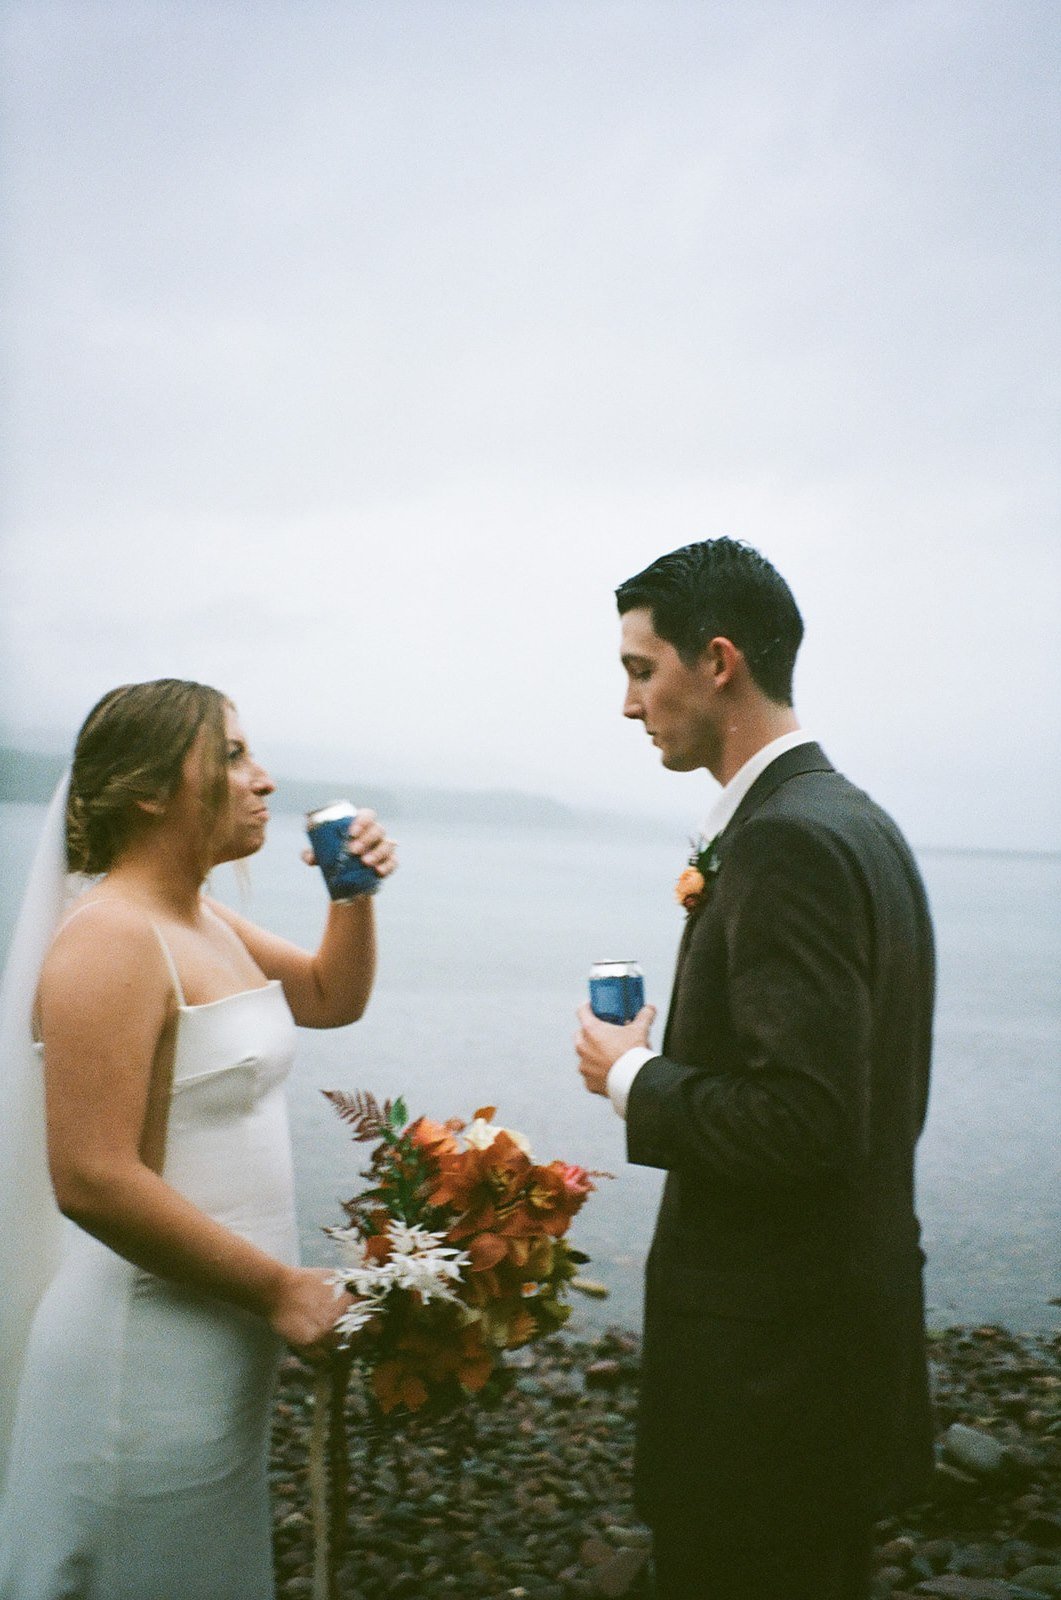 Film photos of bride and groom toasting with beer